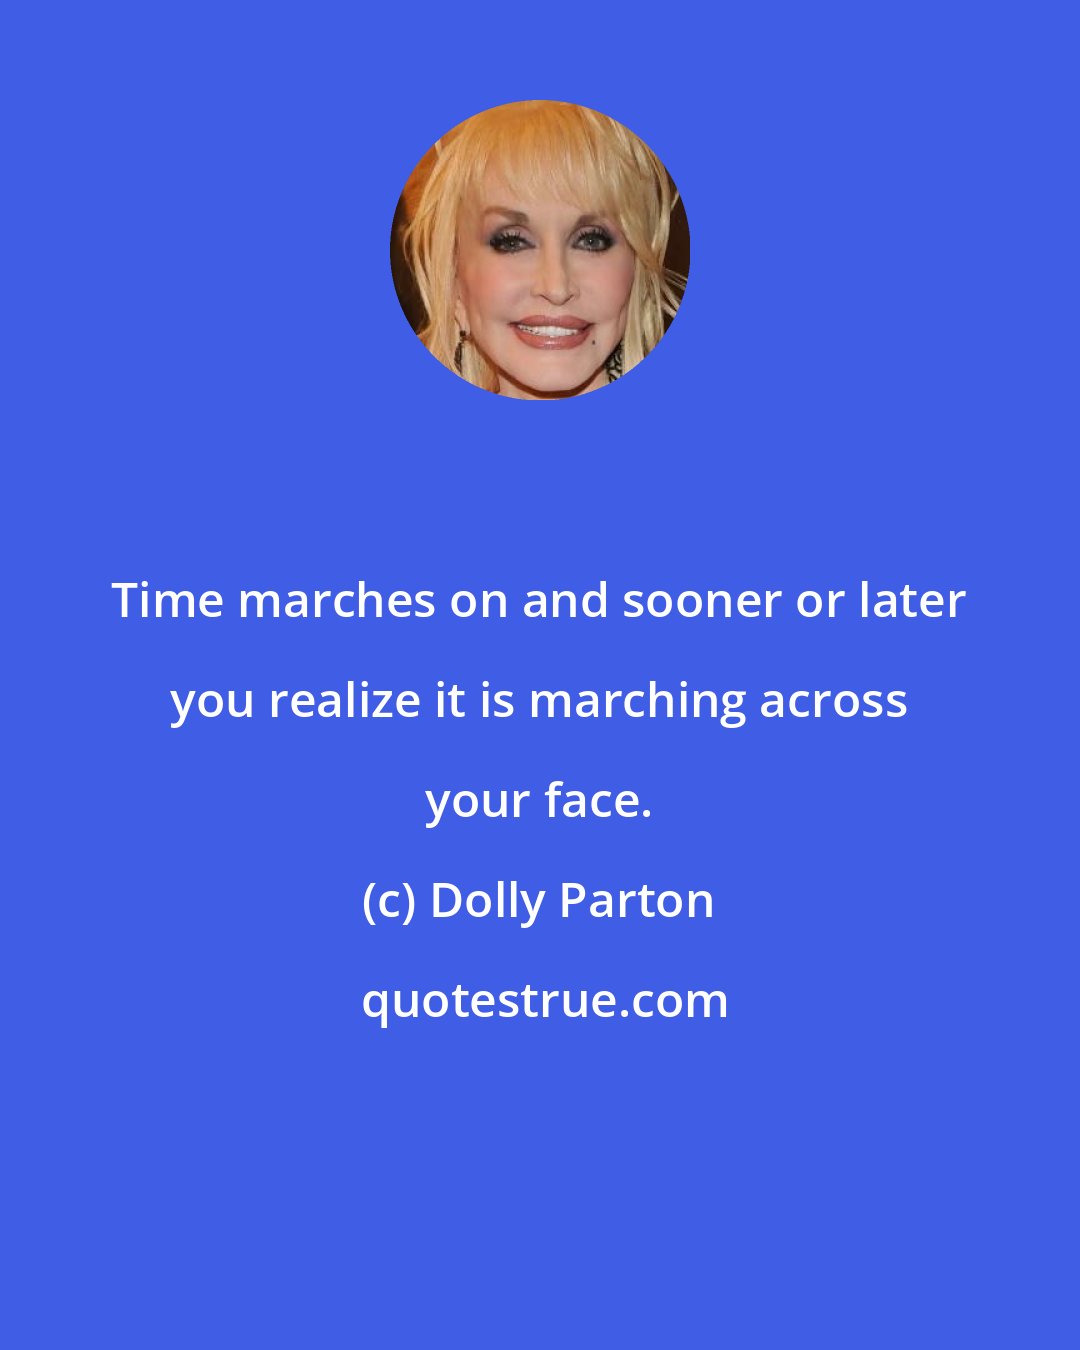 Dolly Parton: Time marches on and sooner or later you realize it is marching across your face.